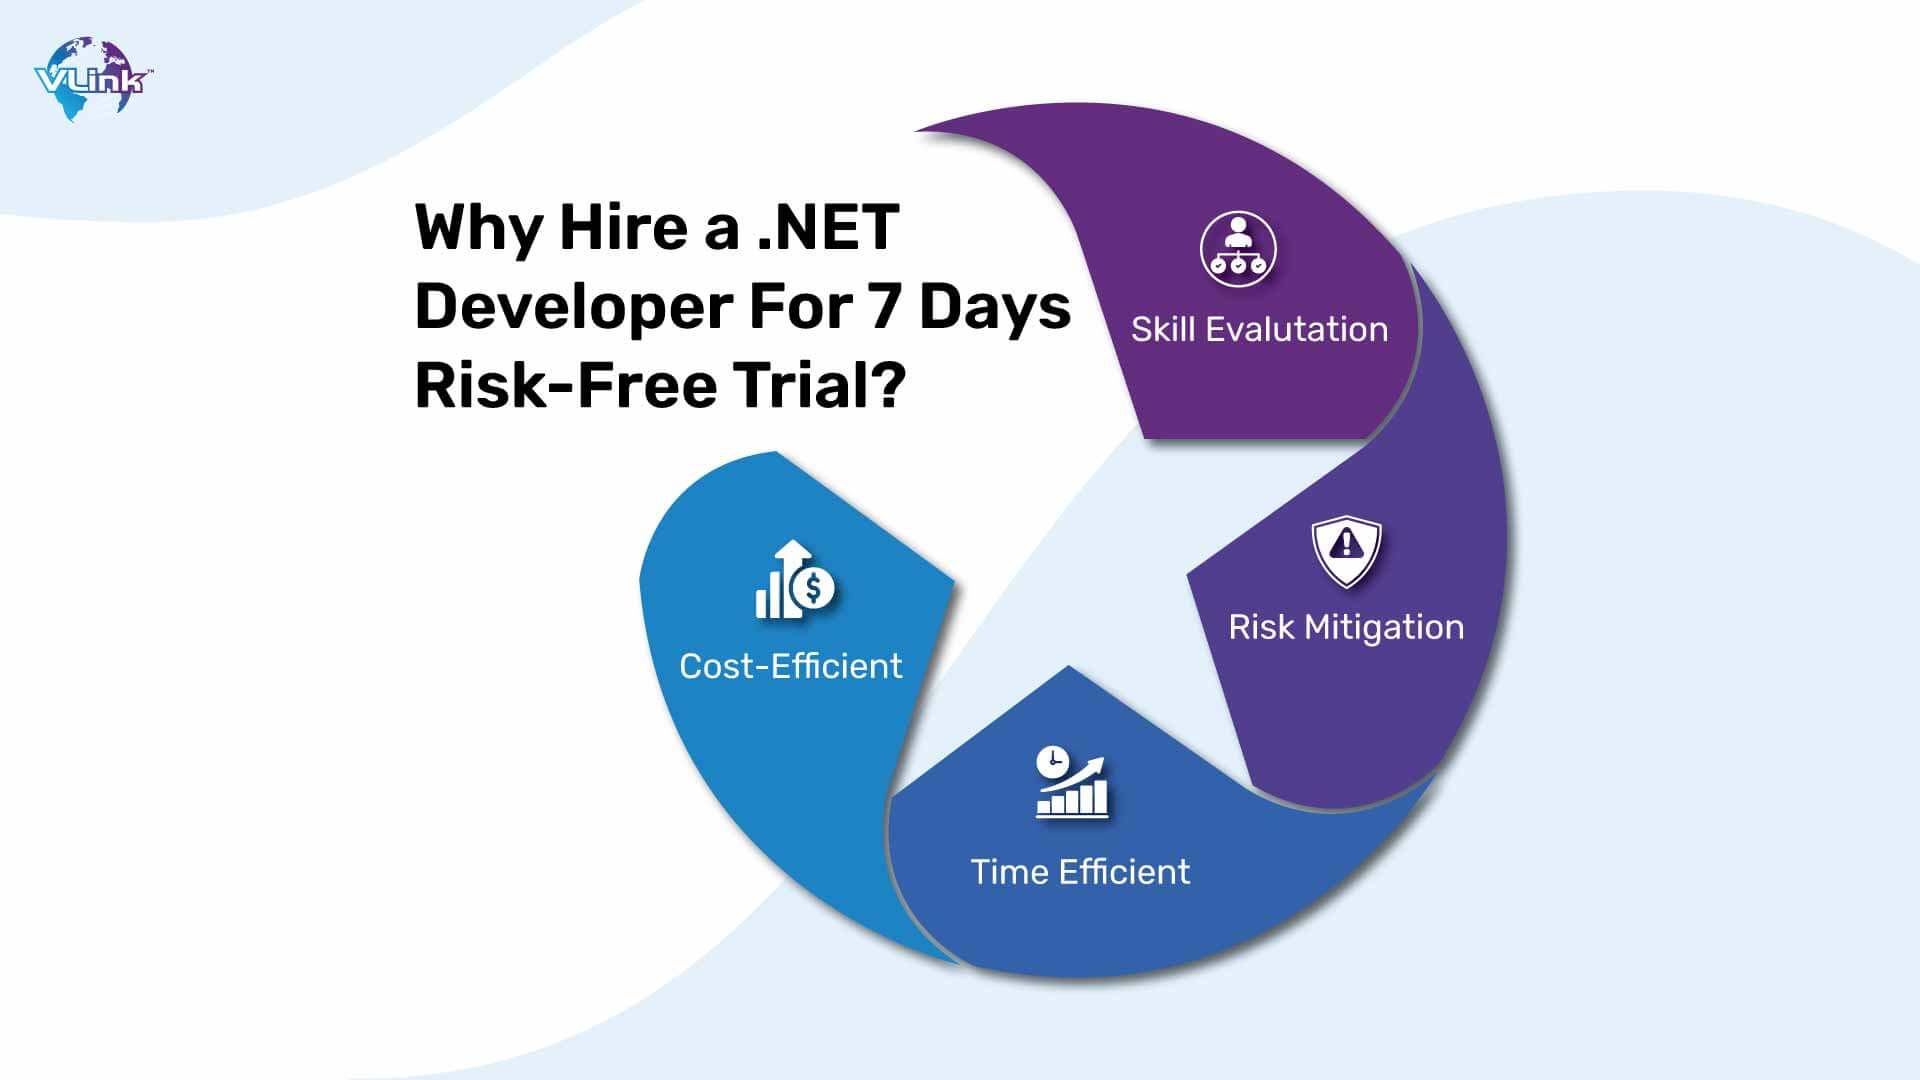 Why Hire a .NET Developer For 7 Days Risk-Free Trial